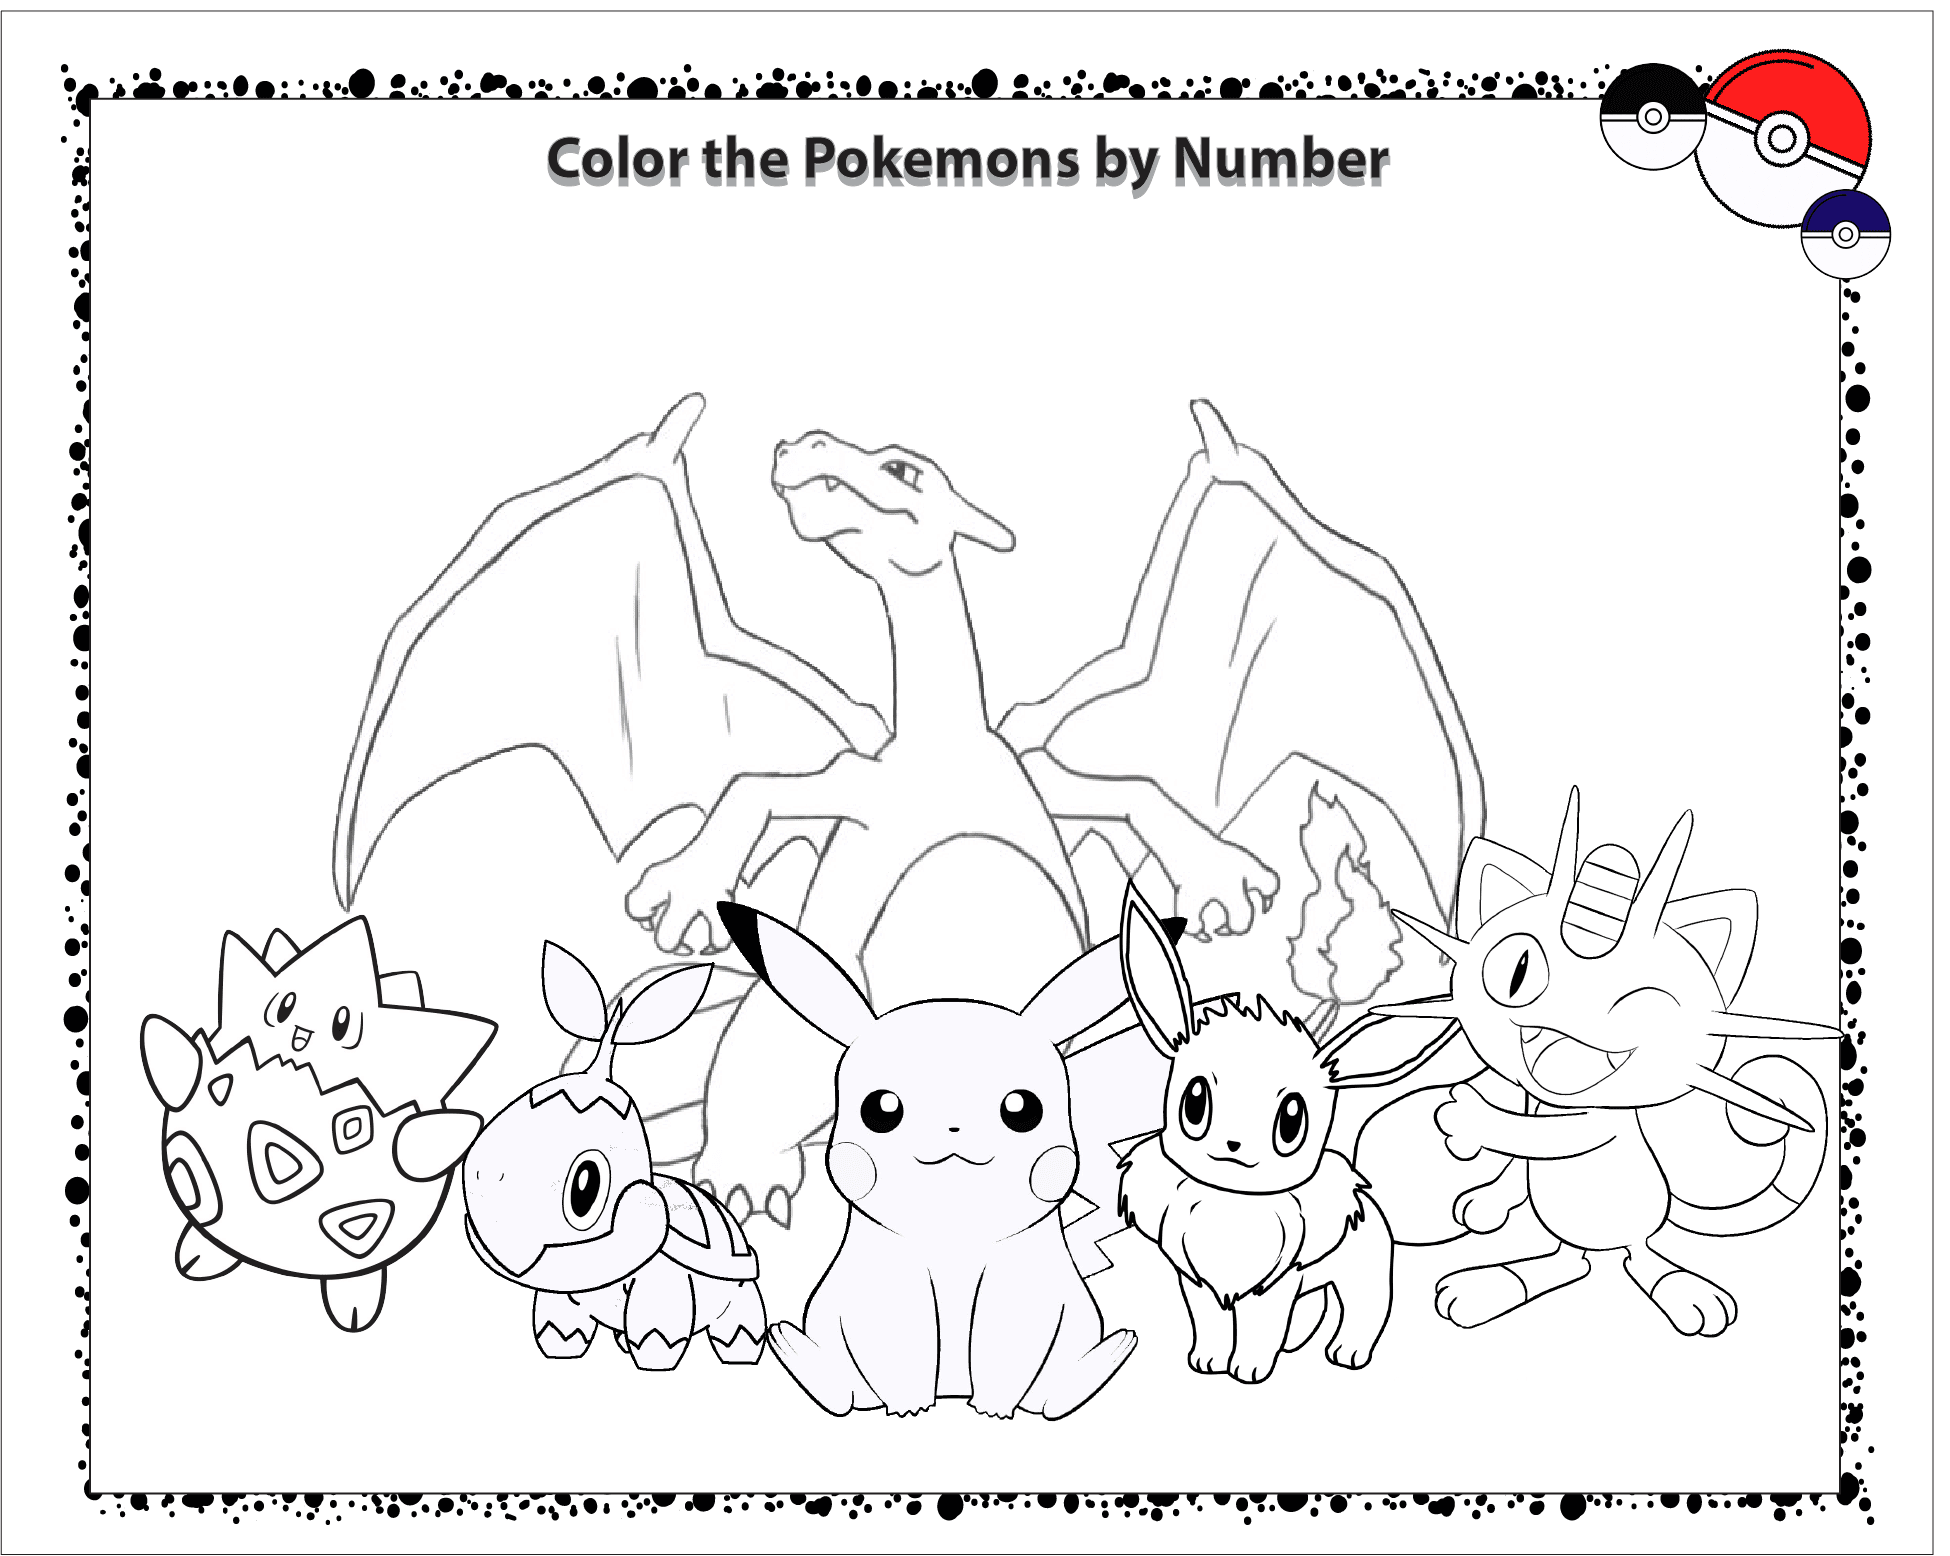 10 Exciting Pokemon Color by Number Coloring Pages | Free Printable